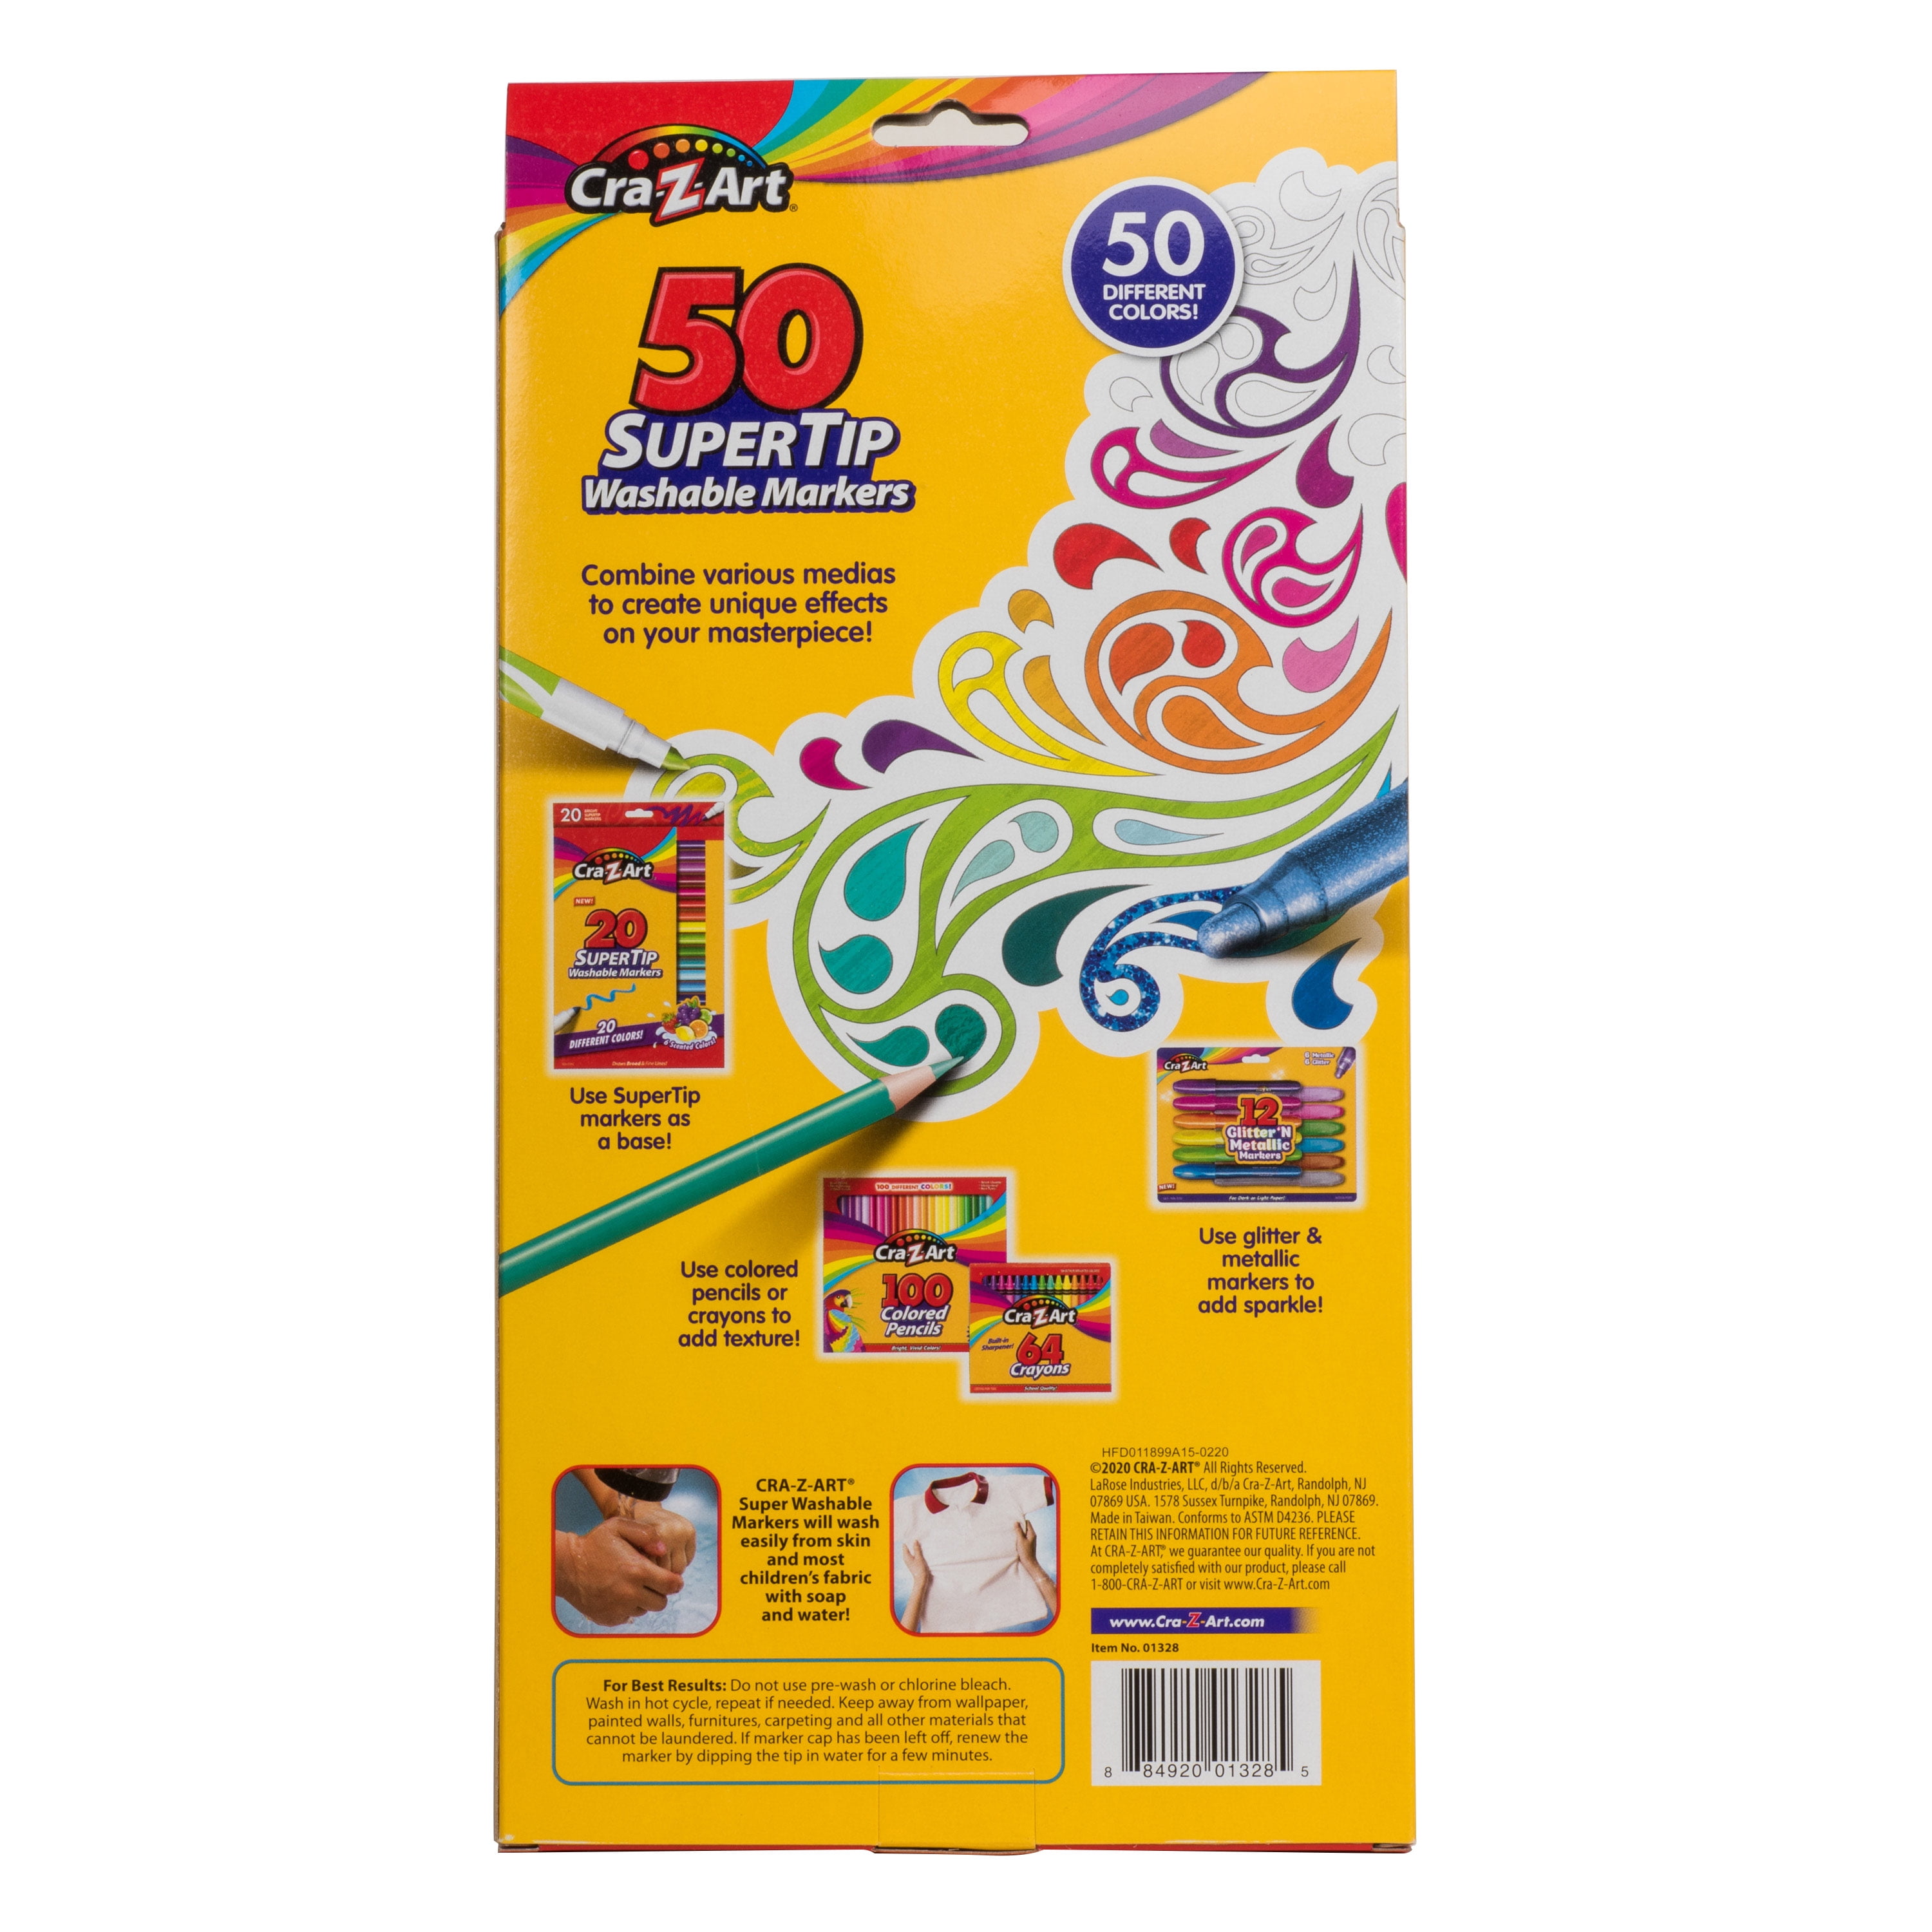 Crayola Washable Supertips Markers, Art Supplies, 50 Count